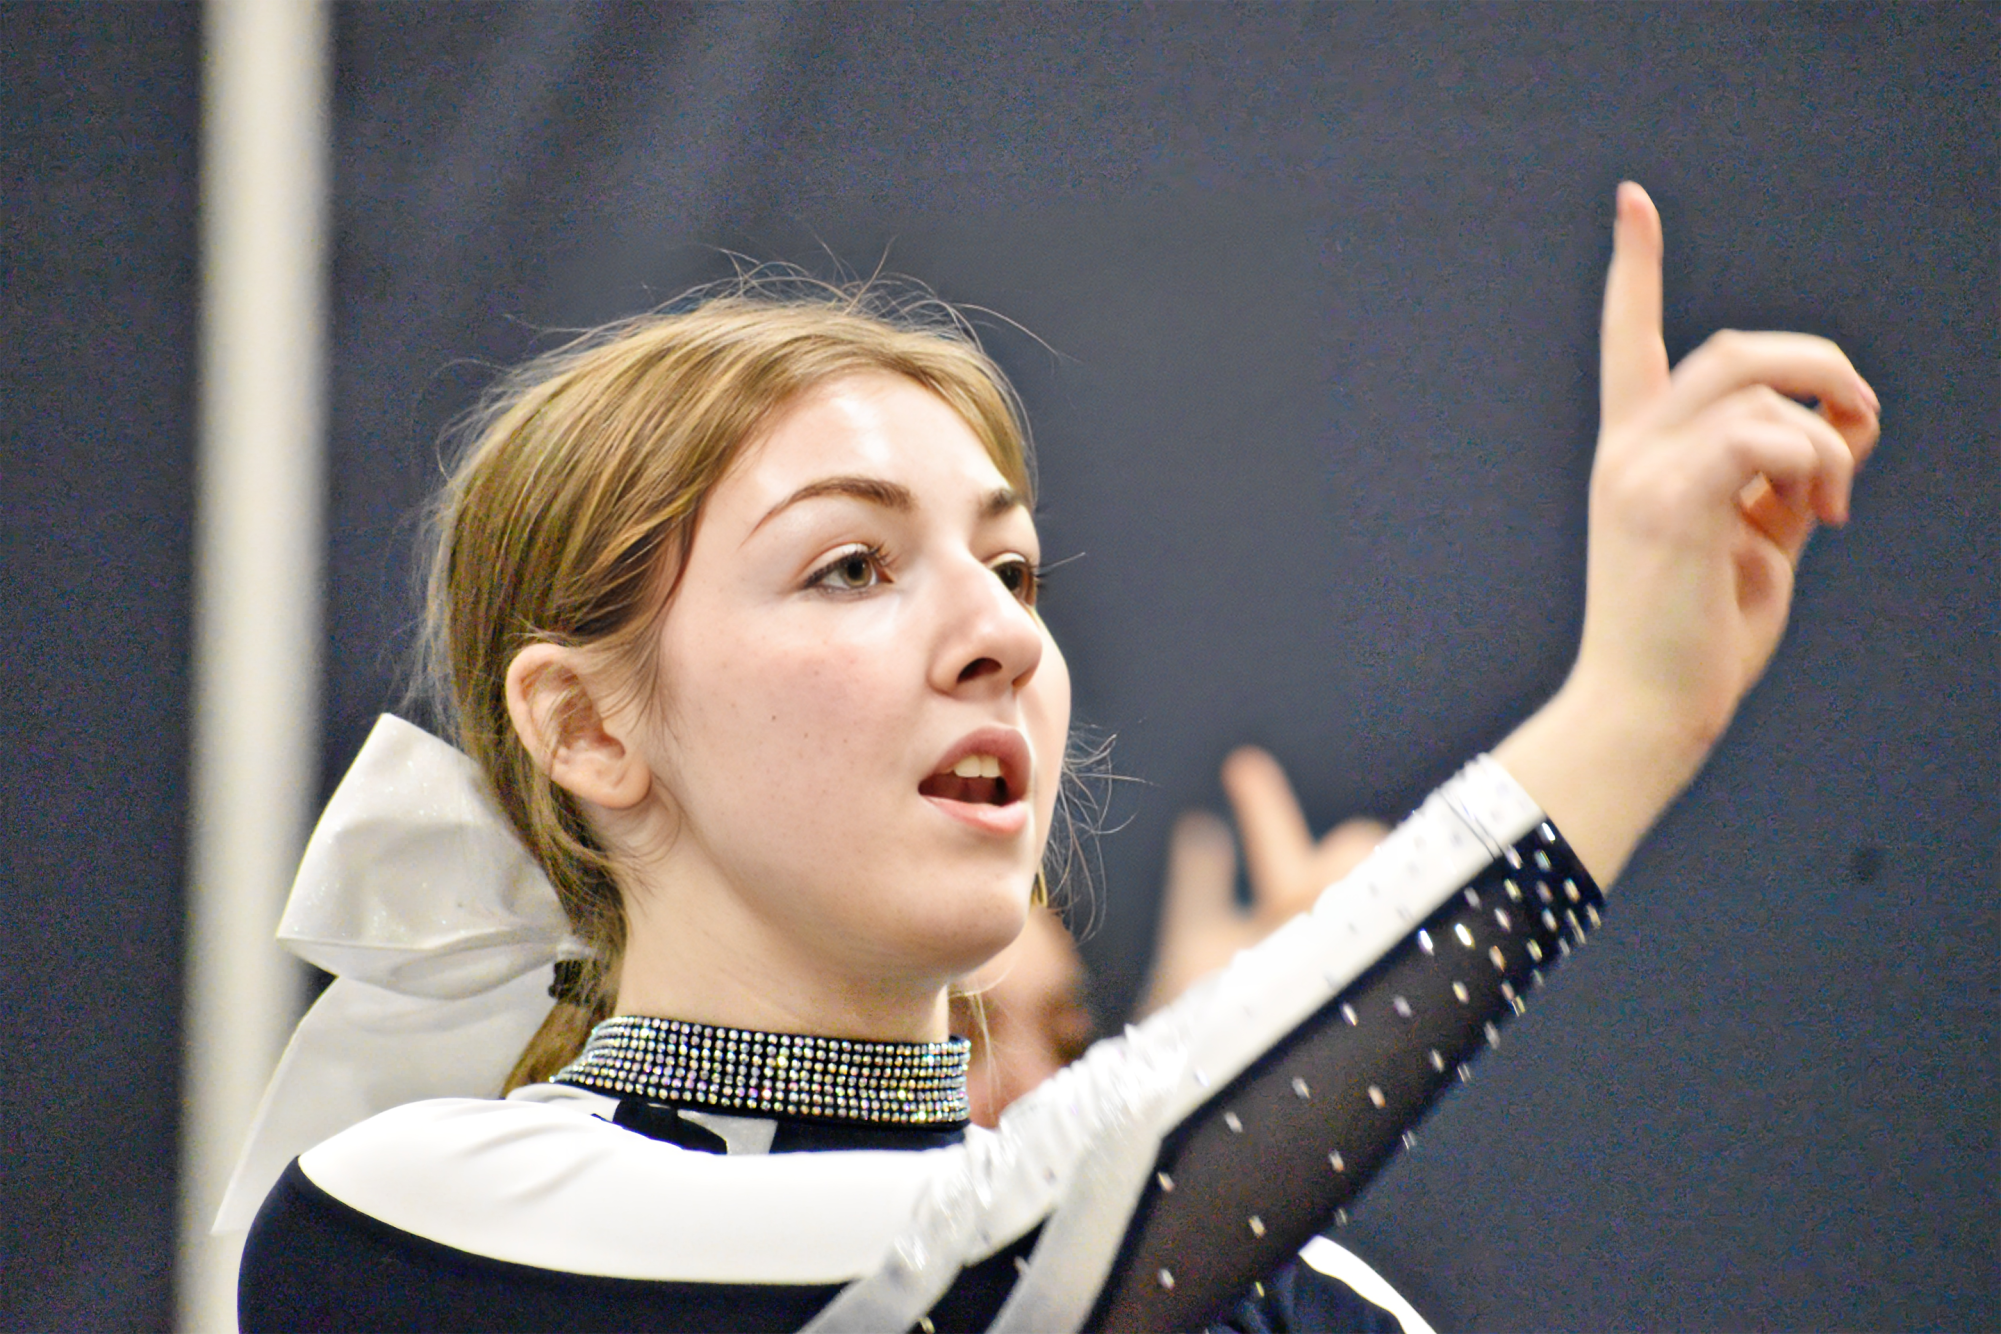 Julia Bloss cheers during practice. Bloss is a seasoned gymnast and dancer.